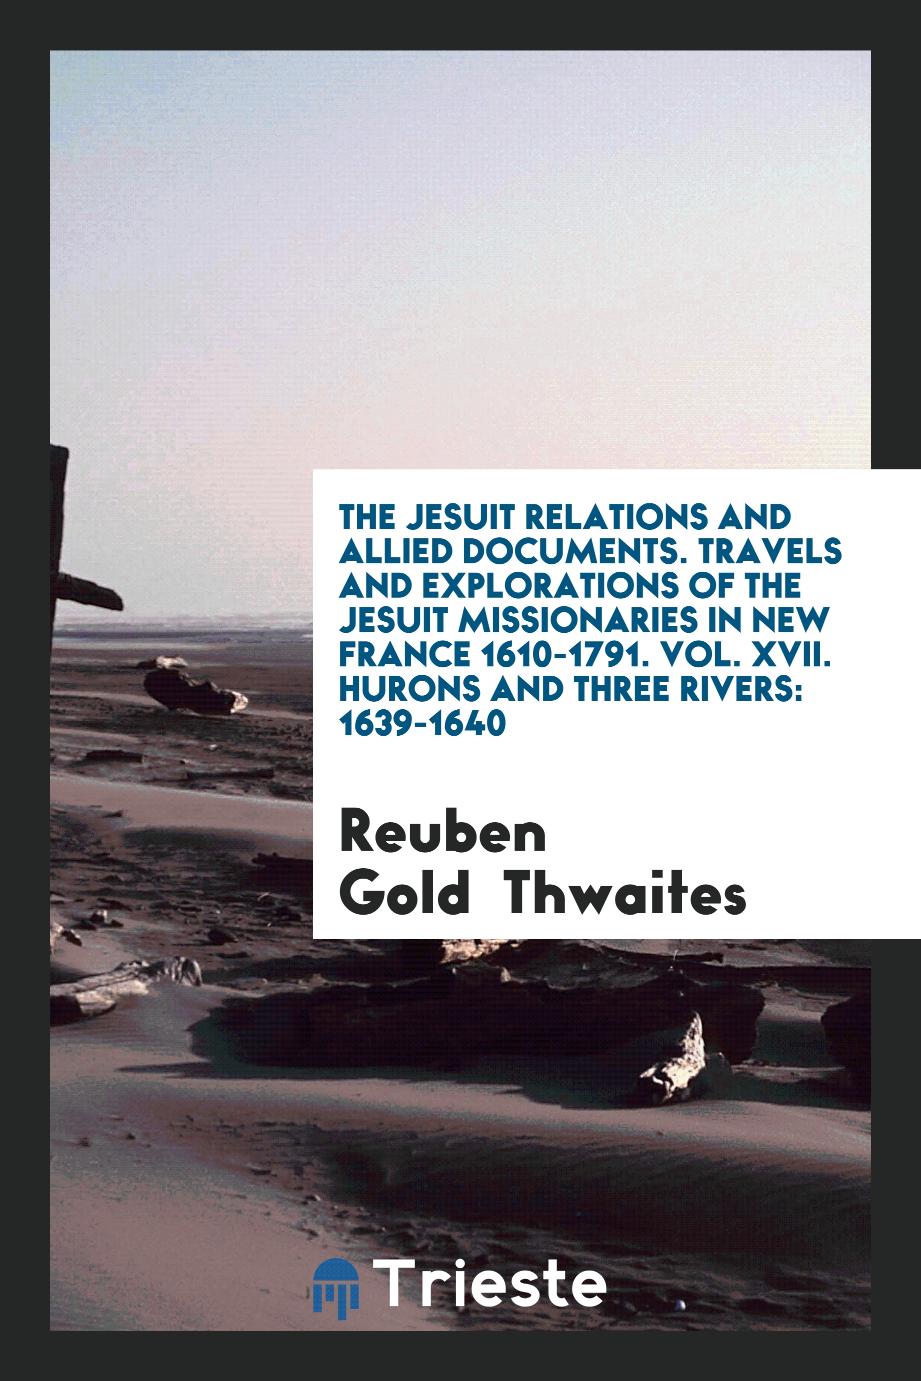 The Jesuit Relations and Allied Documents. Travels and Explorations of the Jesuit Missionaries in New France 1610-1791. Vol. XVII. Hurons and Three Rivers: 1639-1640